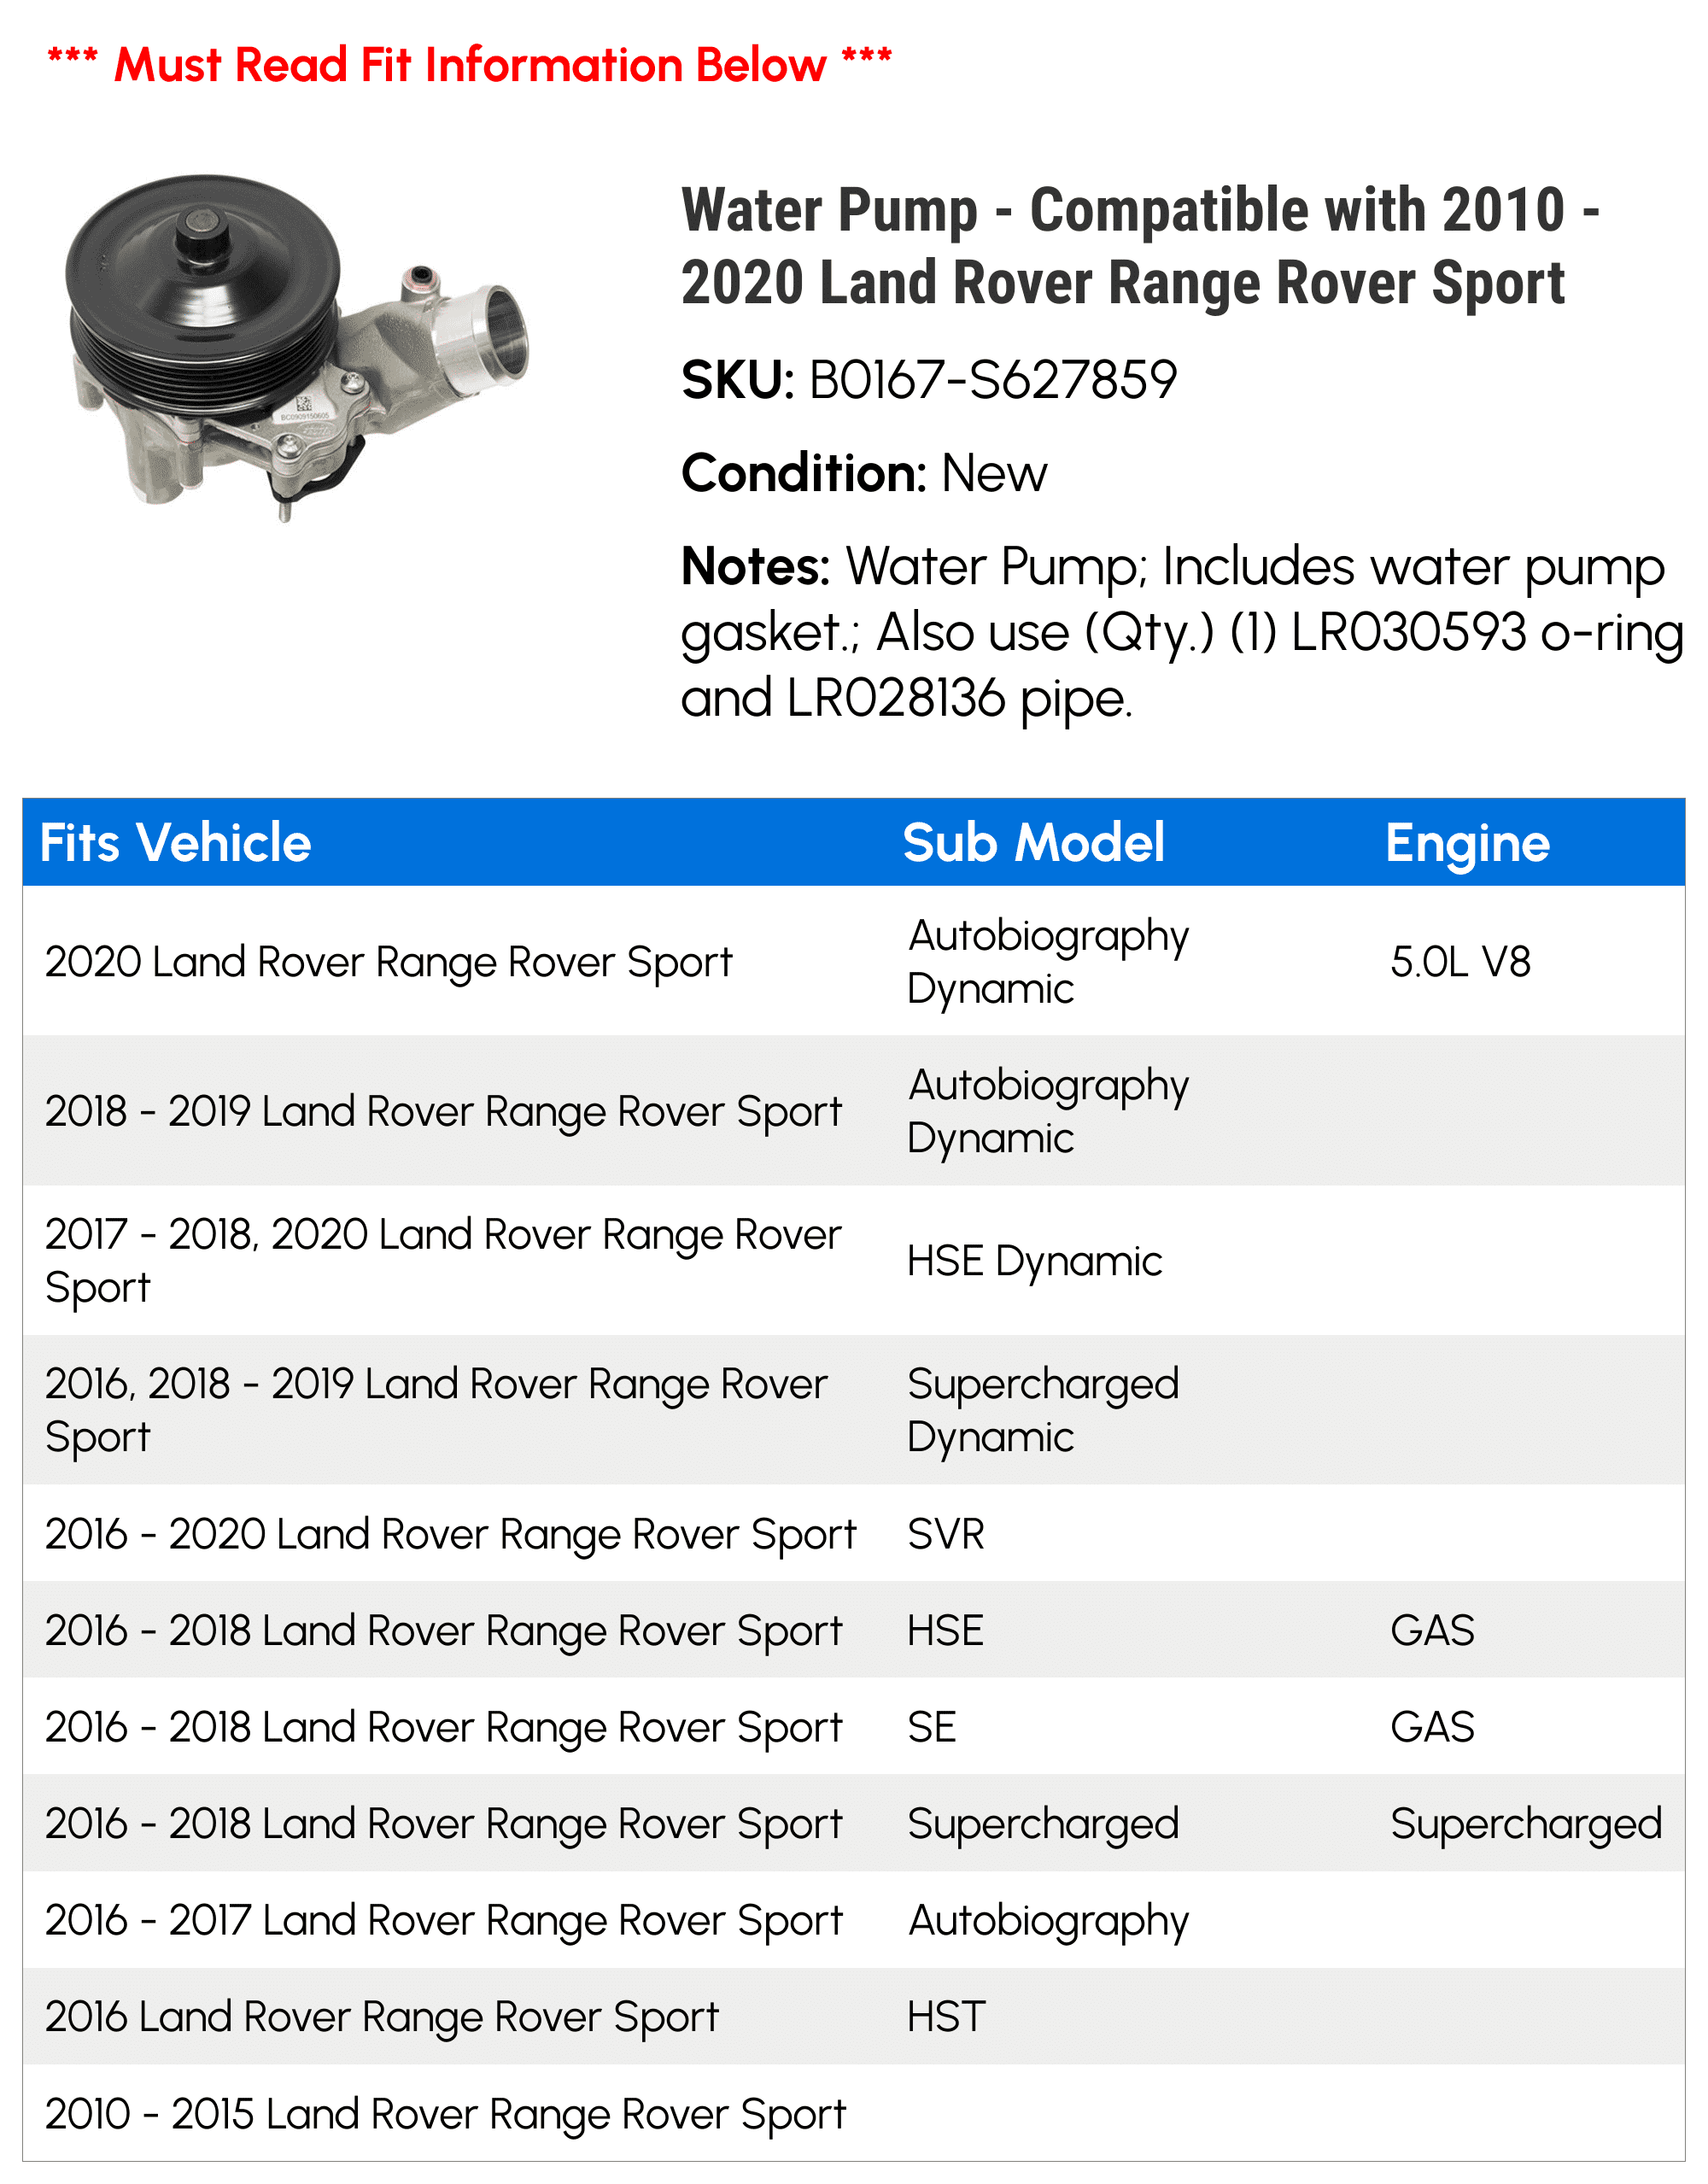 Water Pump - Compatible with 2010 - 2020 Land Rover Range Rover Sport 2011  2012 2013 2014 2015 2016 2017 2018 2019